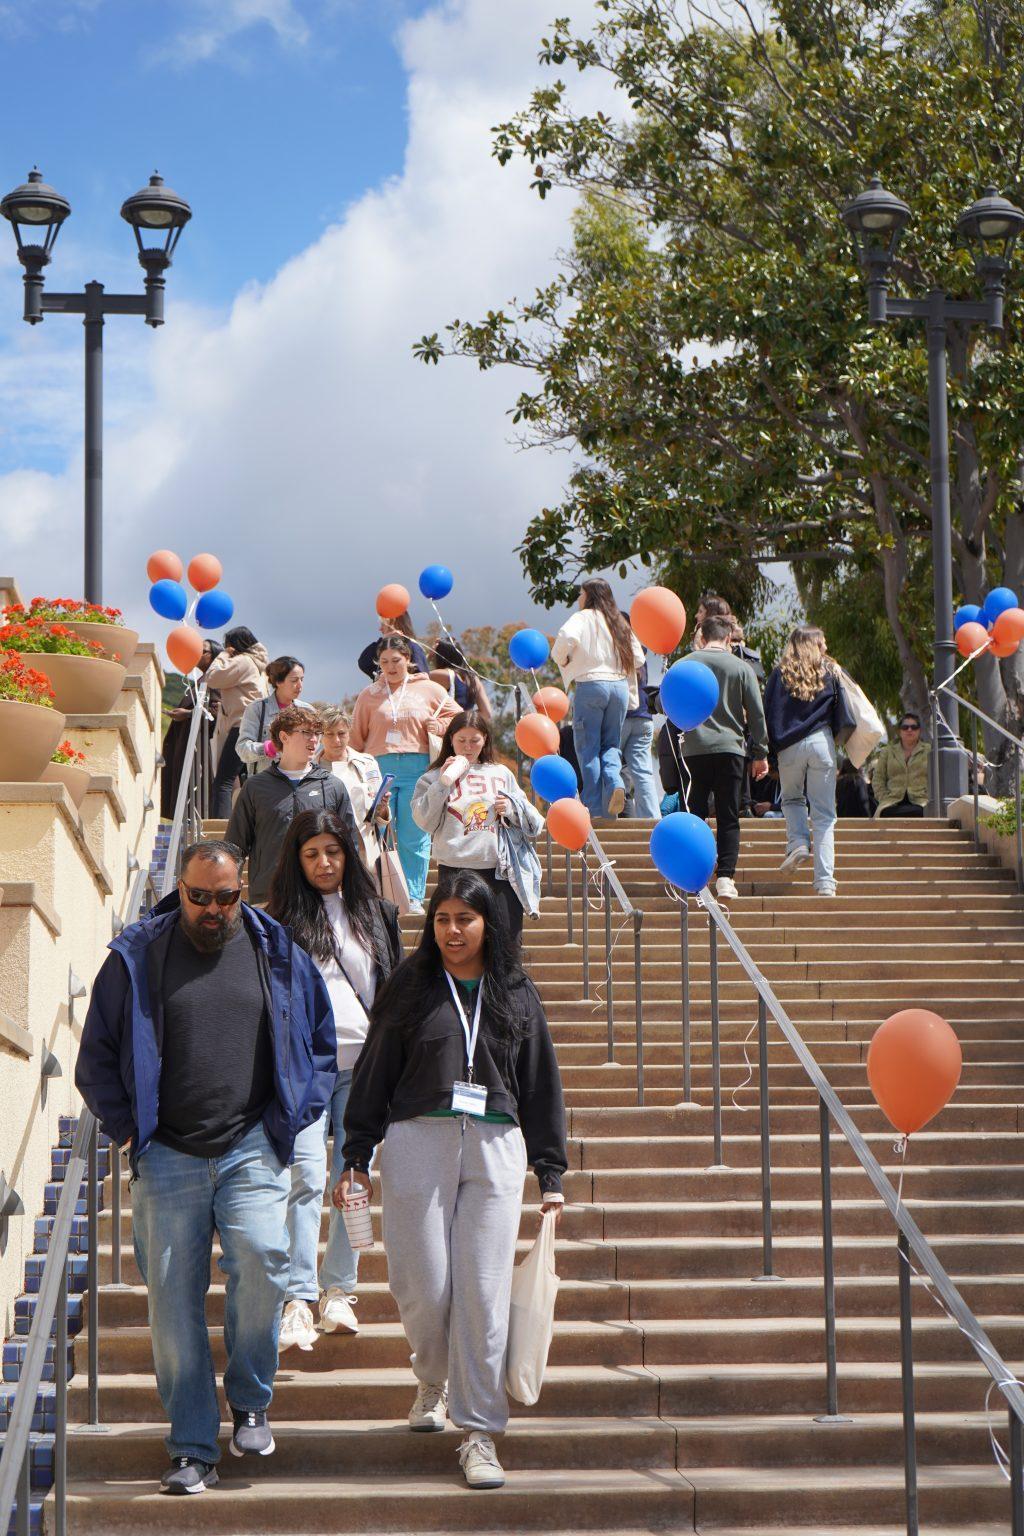 Admitted students and their families step onto Pepperdine's main campus for the first time April 5. Welcome teams decorated the campus with balloons, tents and arrows for directions. Photo by Liam Zieg